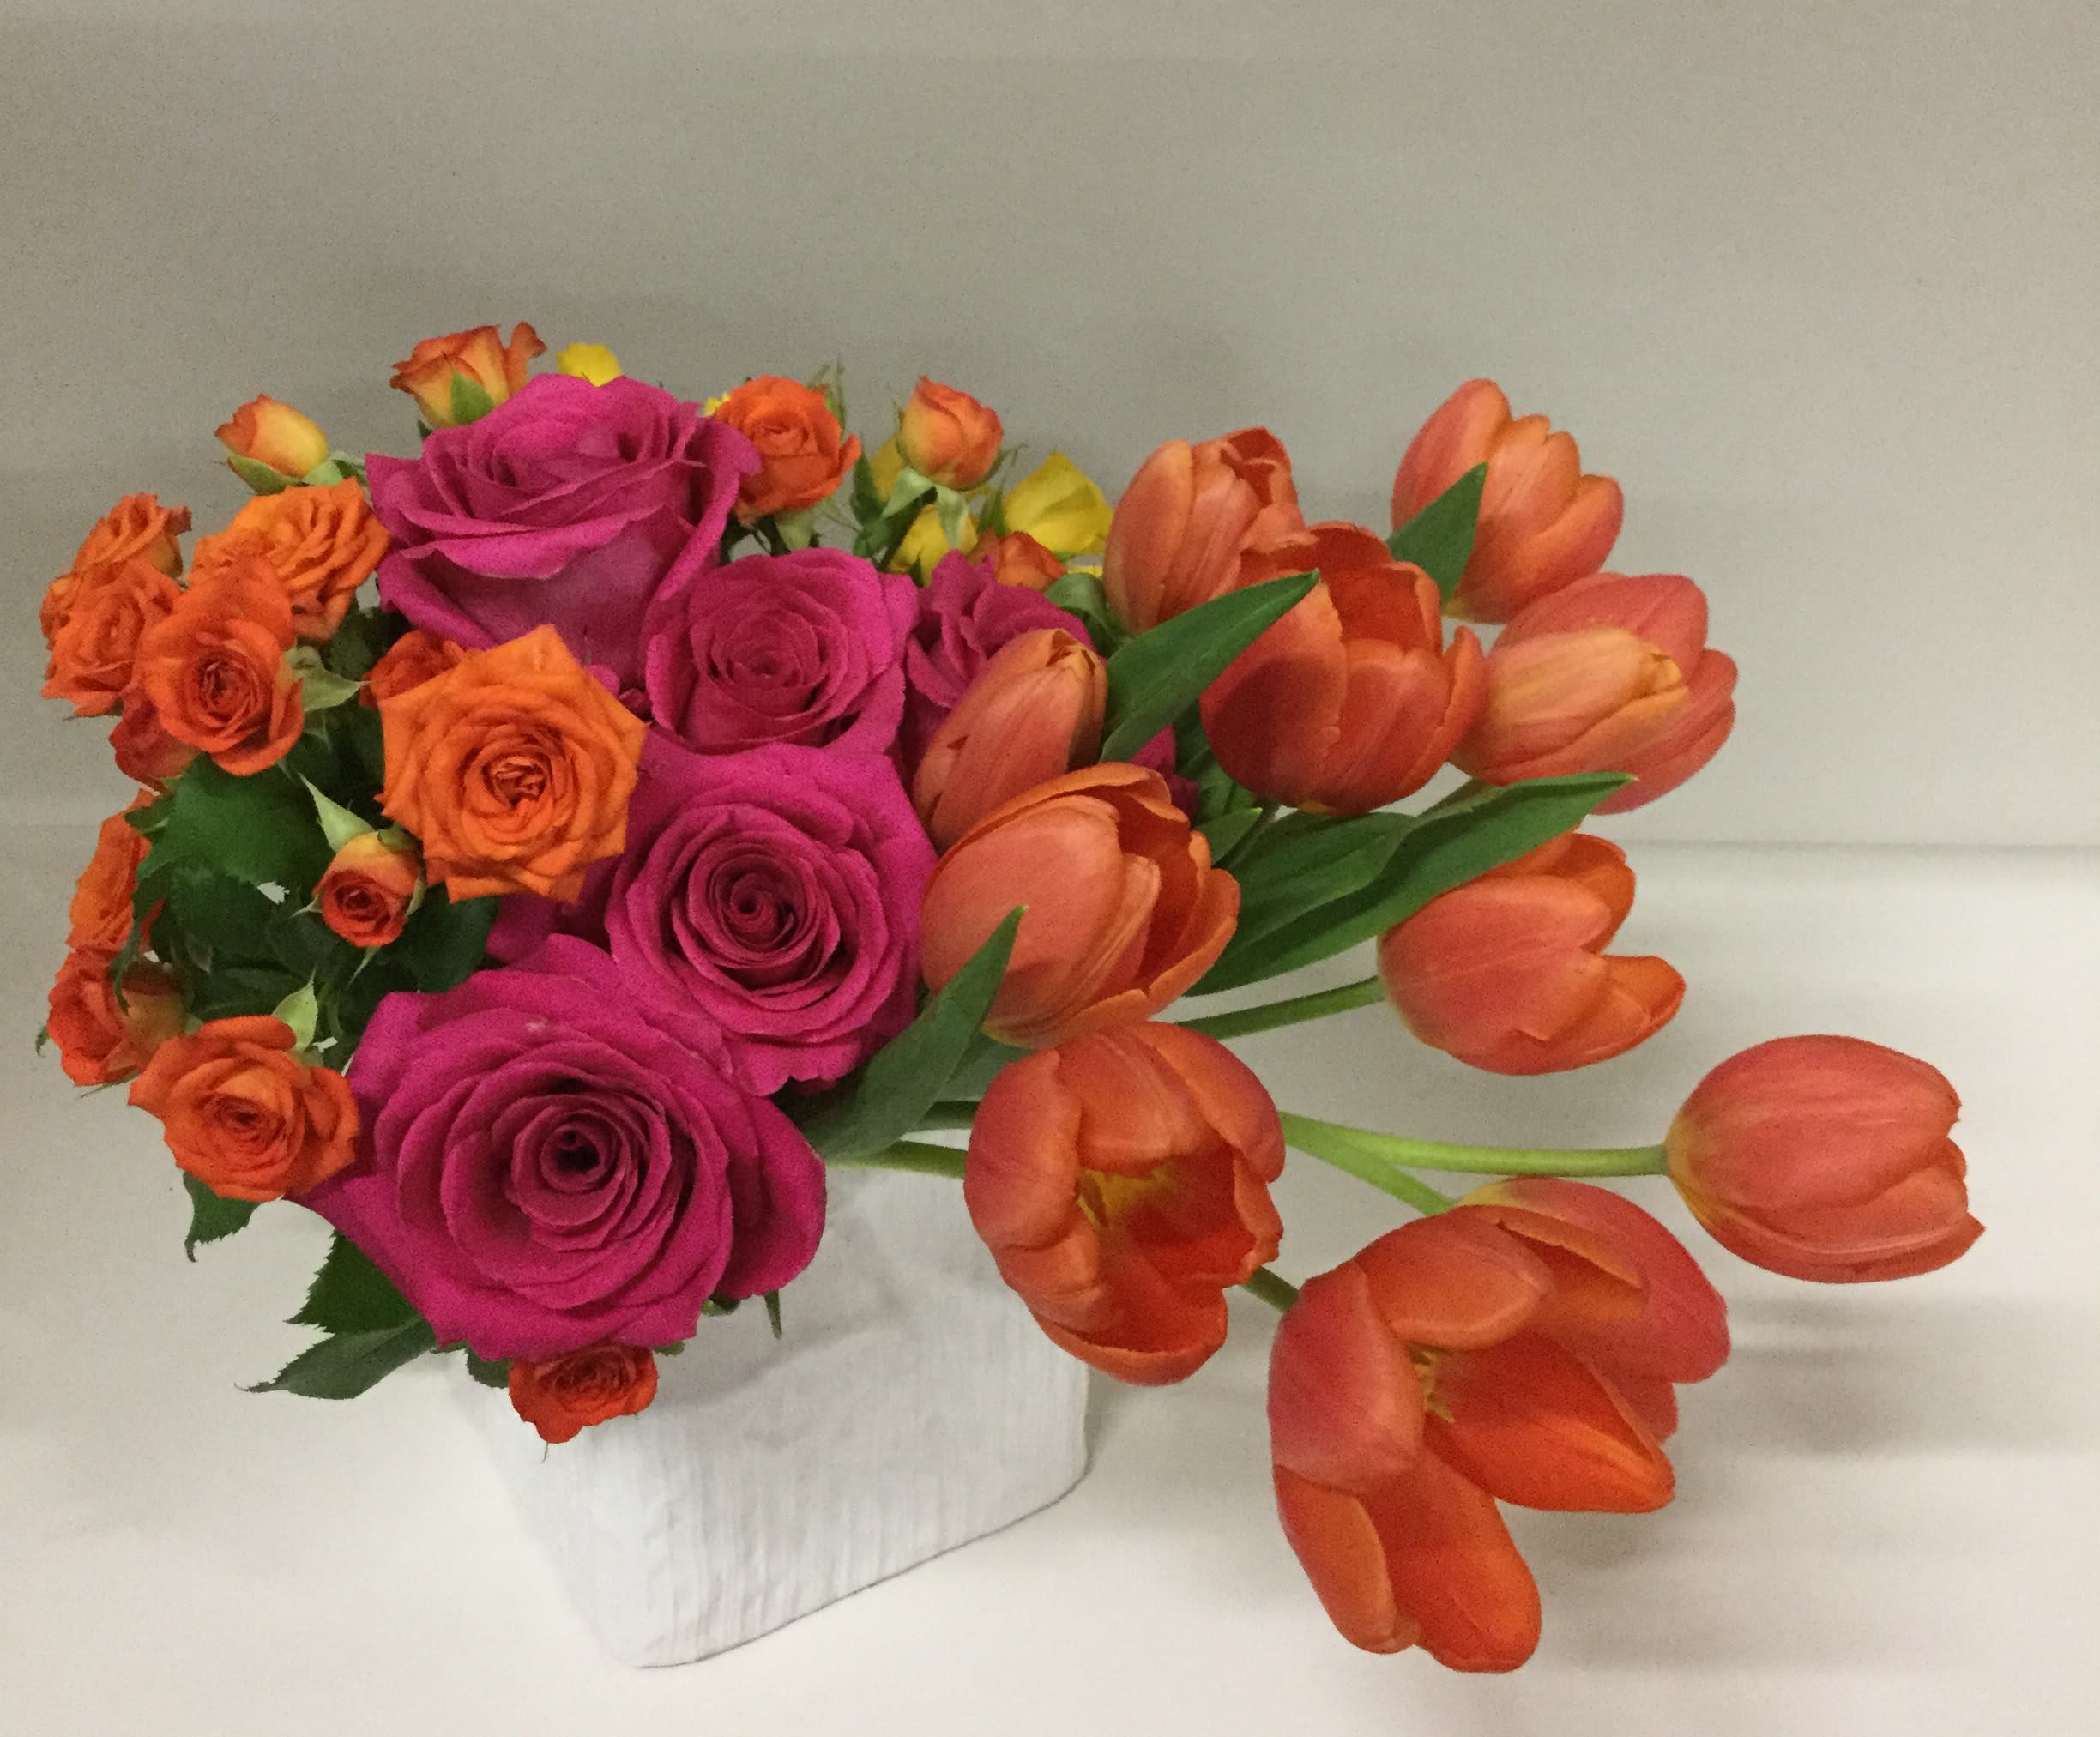 Desert Dawn - This arrangement has a winning combination of color palette and structure of the design. Groupings of hot pink roses, orange spray roses and asymmetrically extending orange tulips, with just a touch of greenery, indeed resembles the dawn colors of Arizona sky. All arranged in a 5”x 5” white satin cube. Approximate dimensions: 9”x 13”